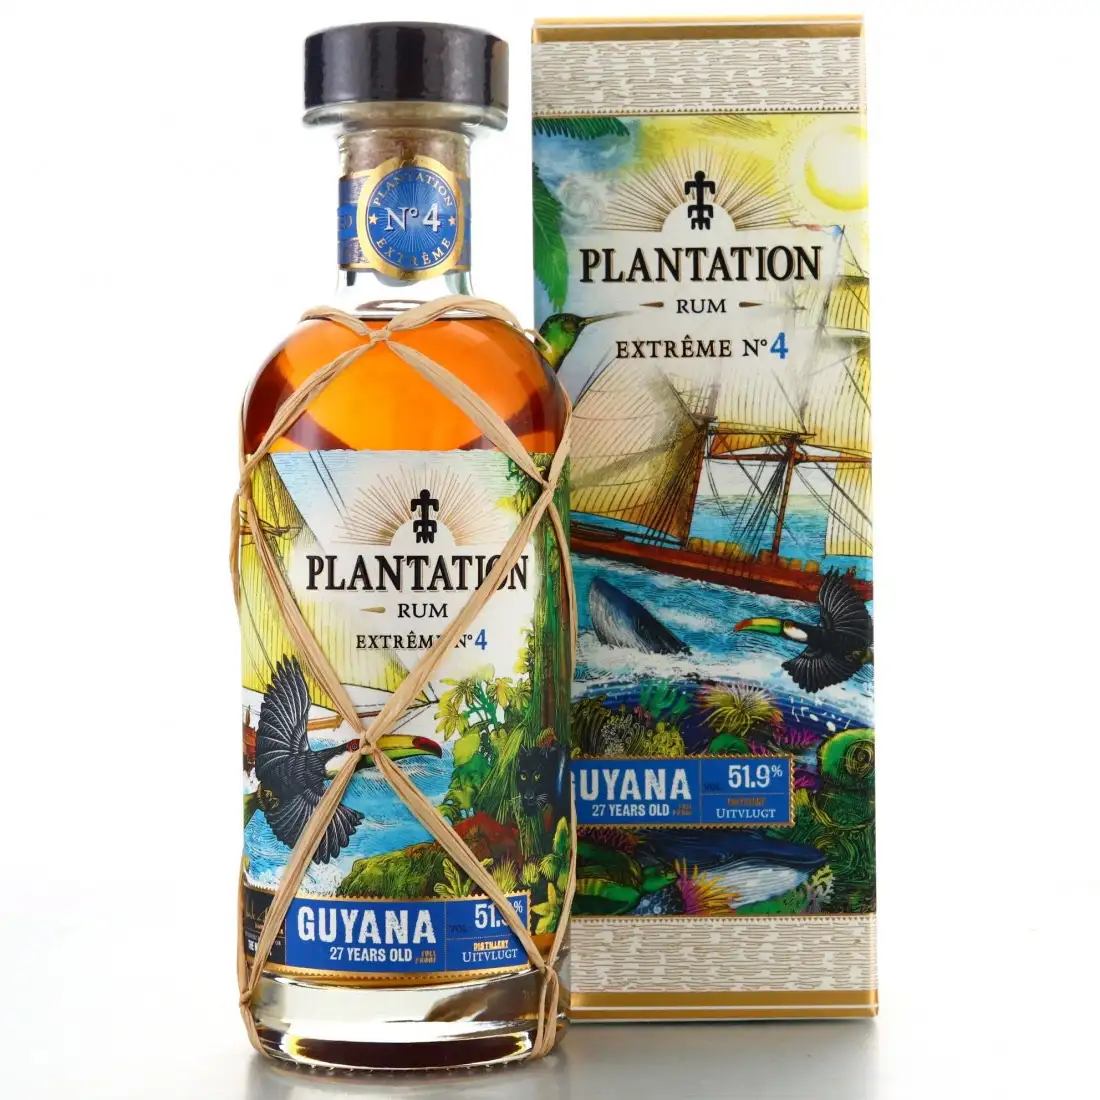 Image of the front of the bottle of the rum Plantation Extrême N.4 (For Belgium - The Nectar)